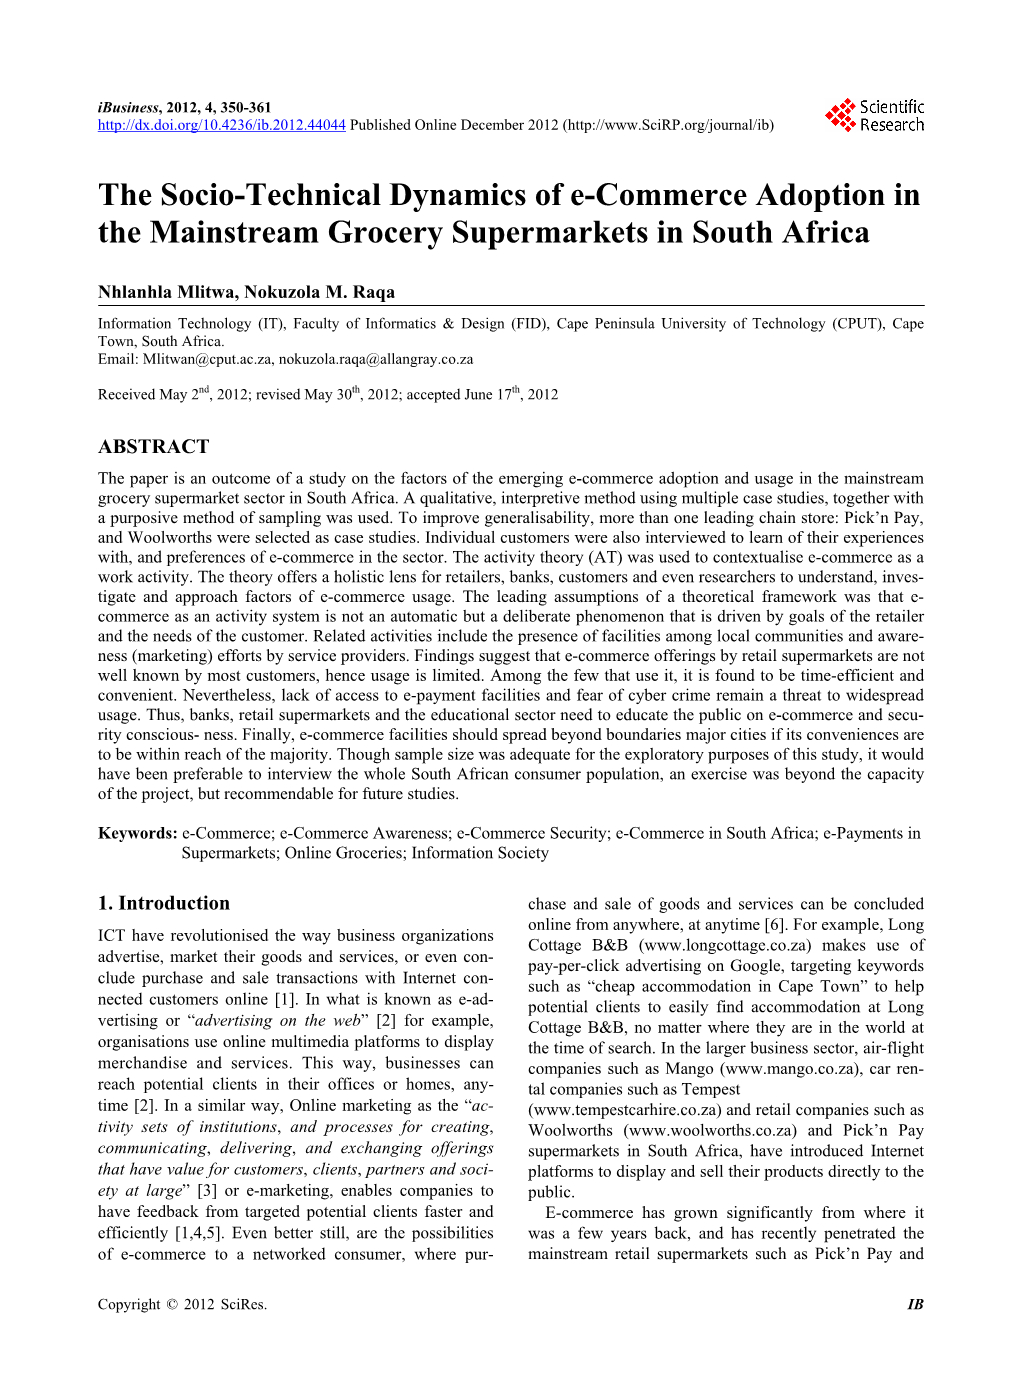 The Socio-Technical Dynamics of E-Commerce Adoption in the Mainstream Grocery Supermarkets in South Africa